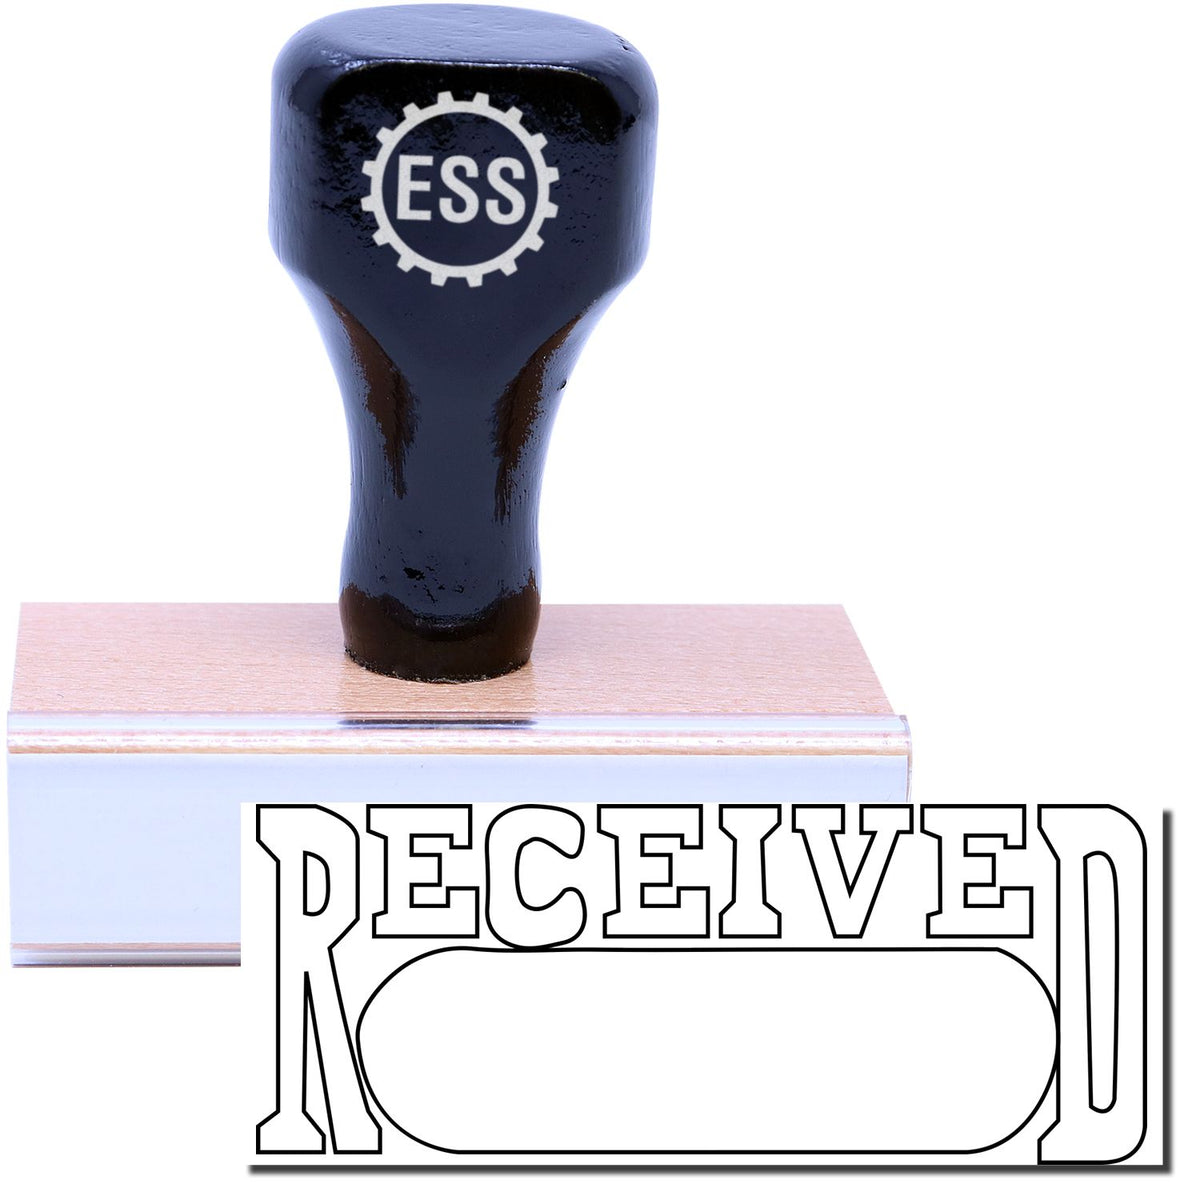 A stock office rubber stamp with a stamped image showing how the text &quot;RECEIVED&quot; in an outline font with a date box is displayed after stamping.